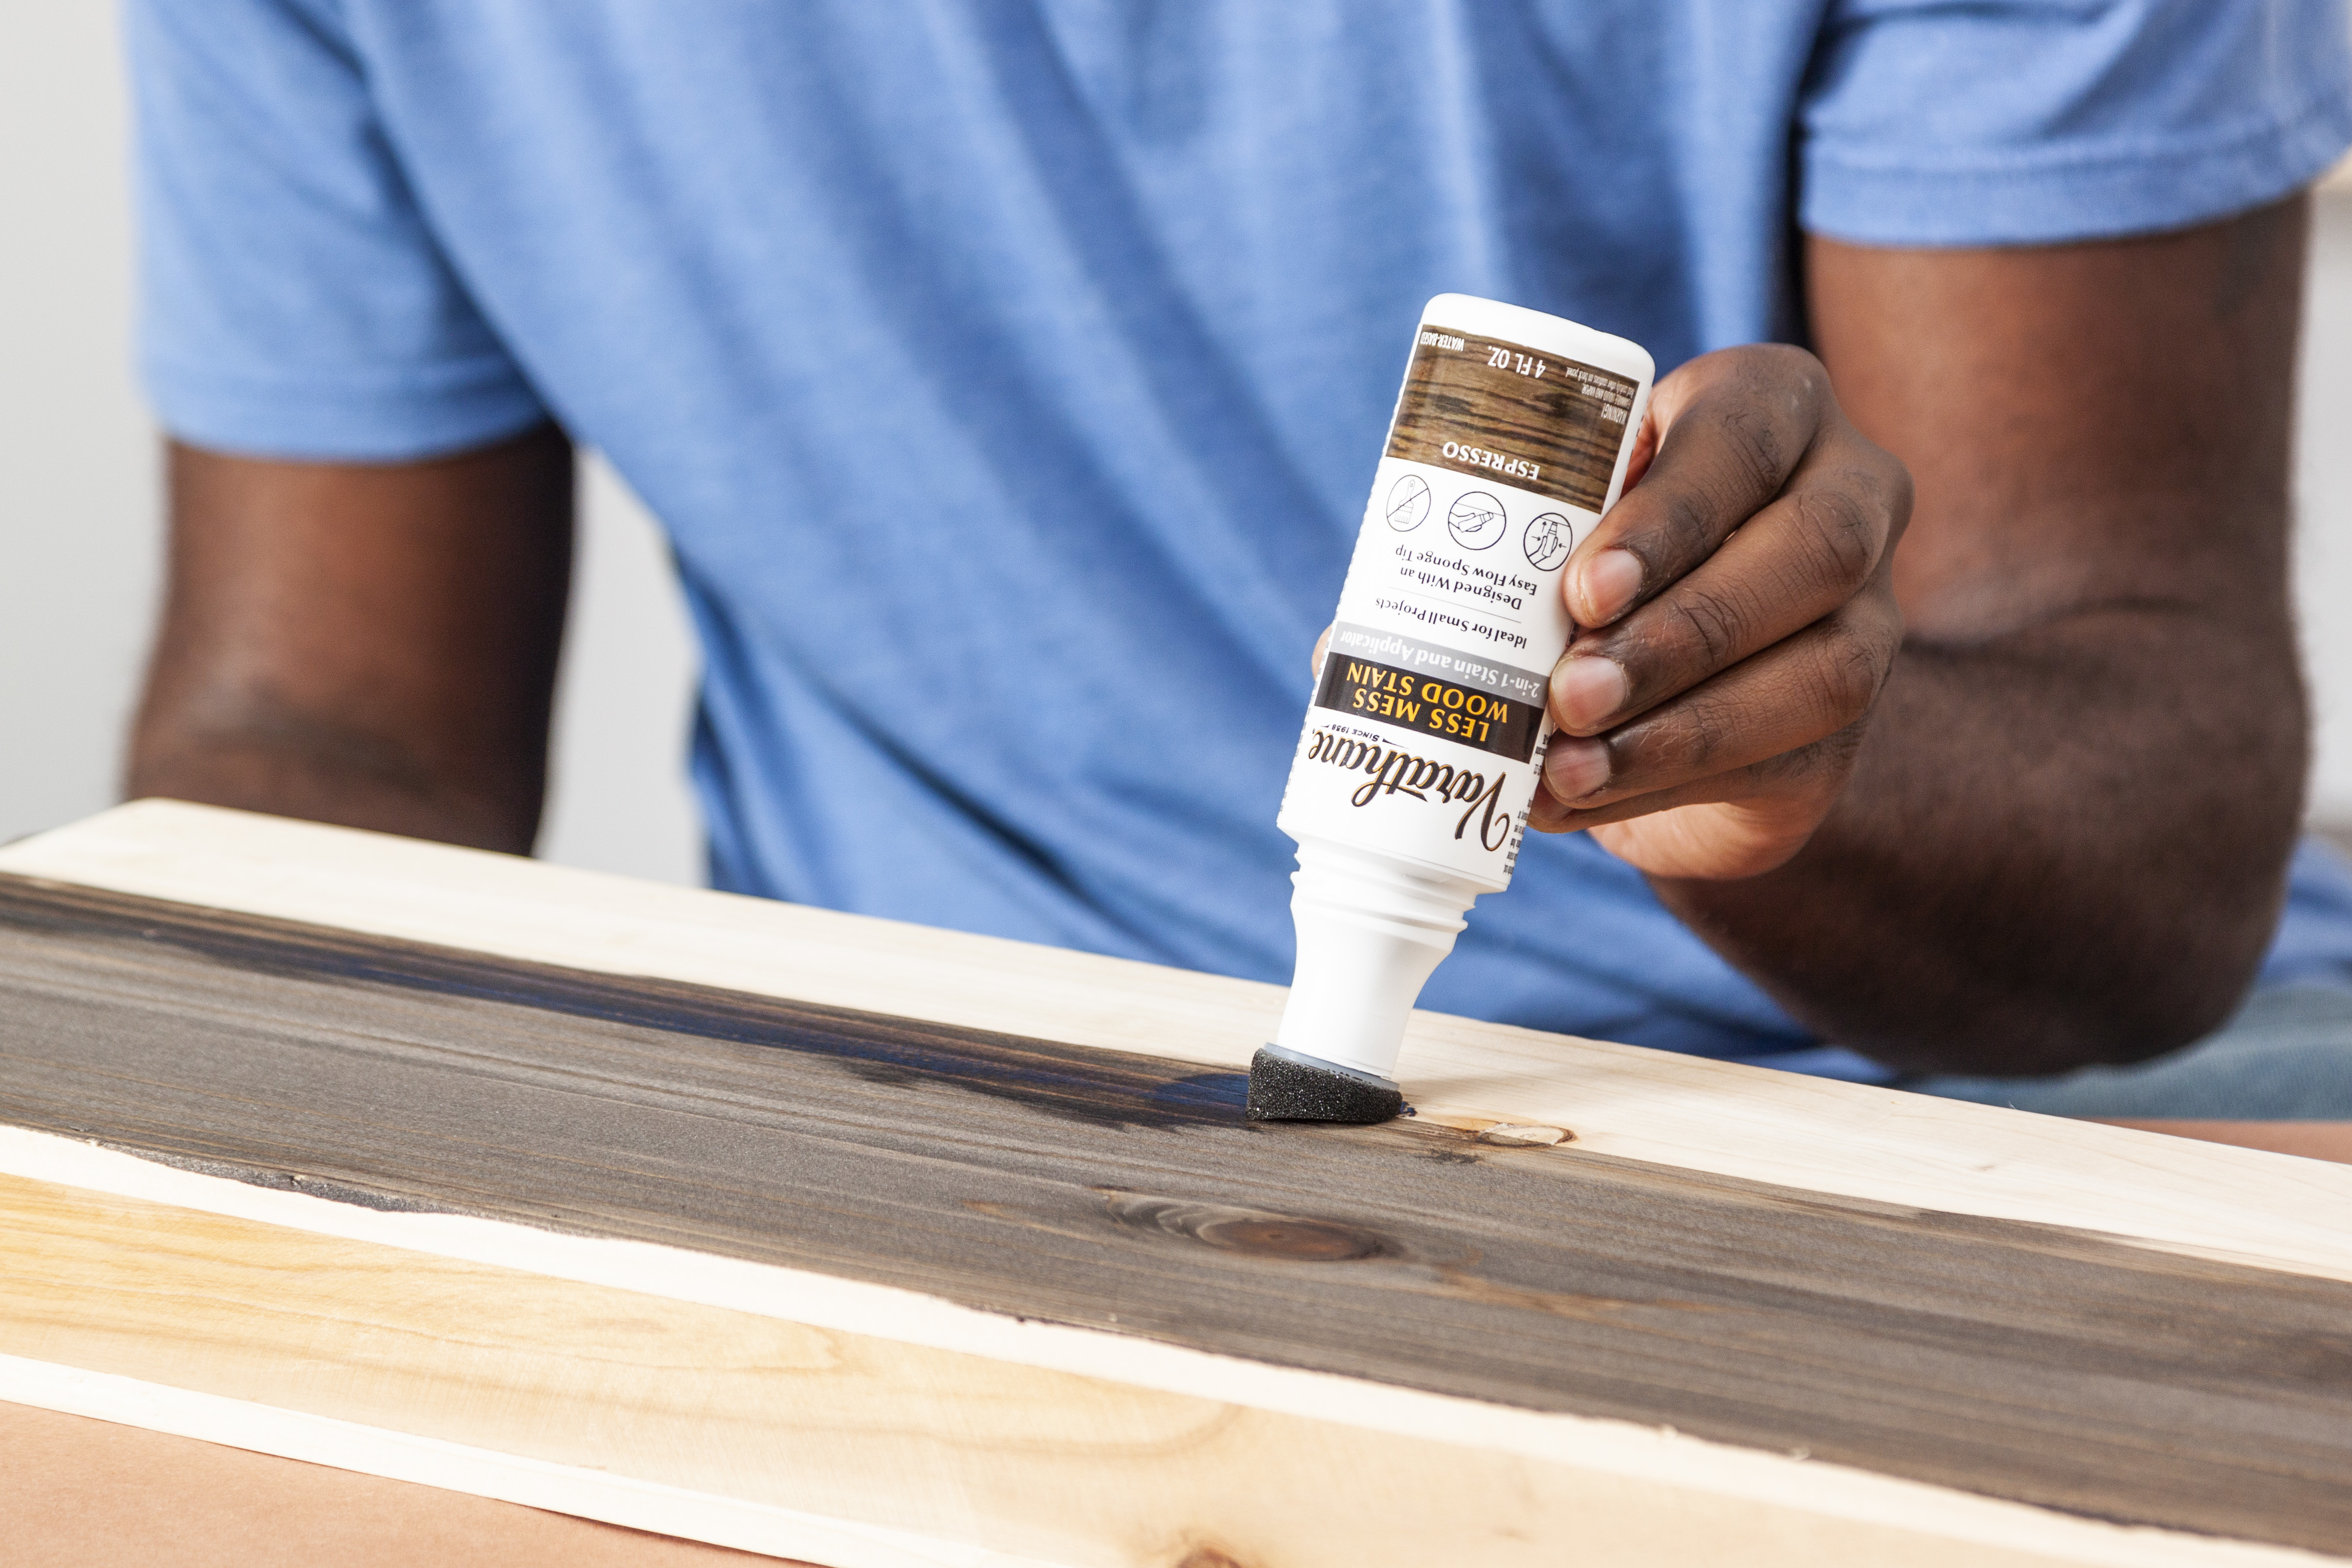 Less Mess Wood Stain makes projects easy, fun & clean